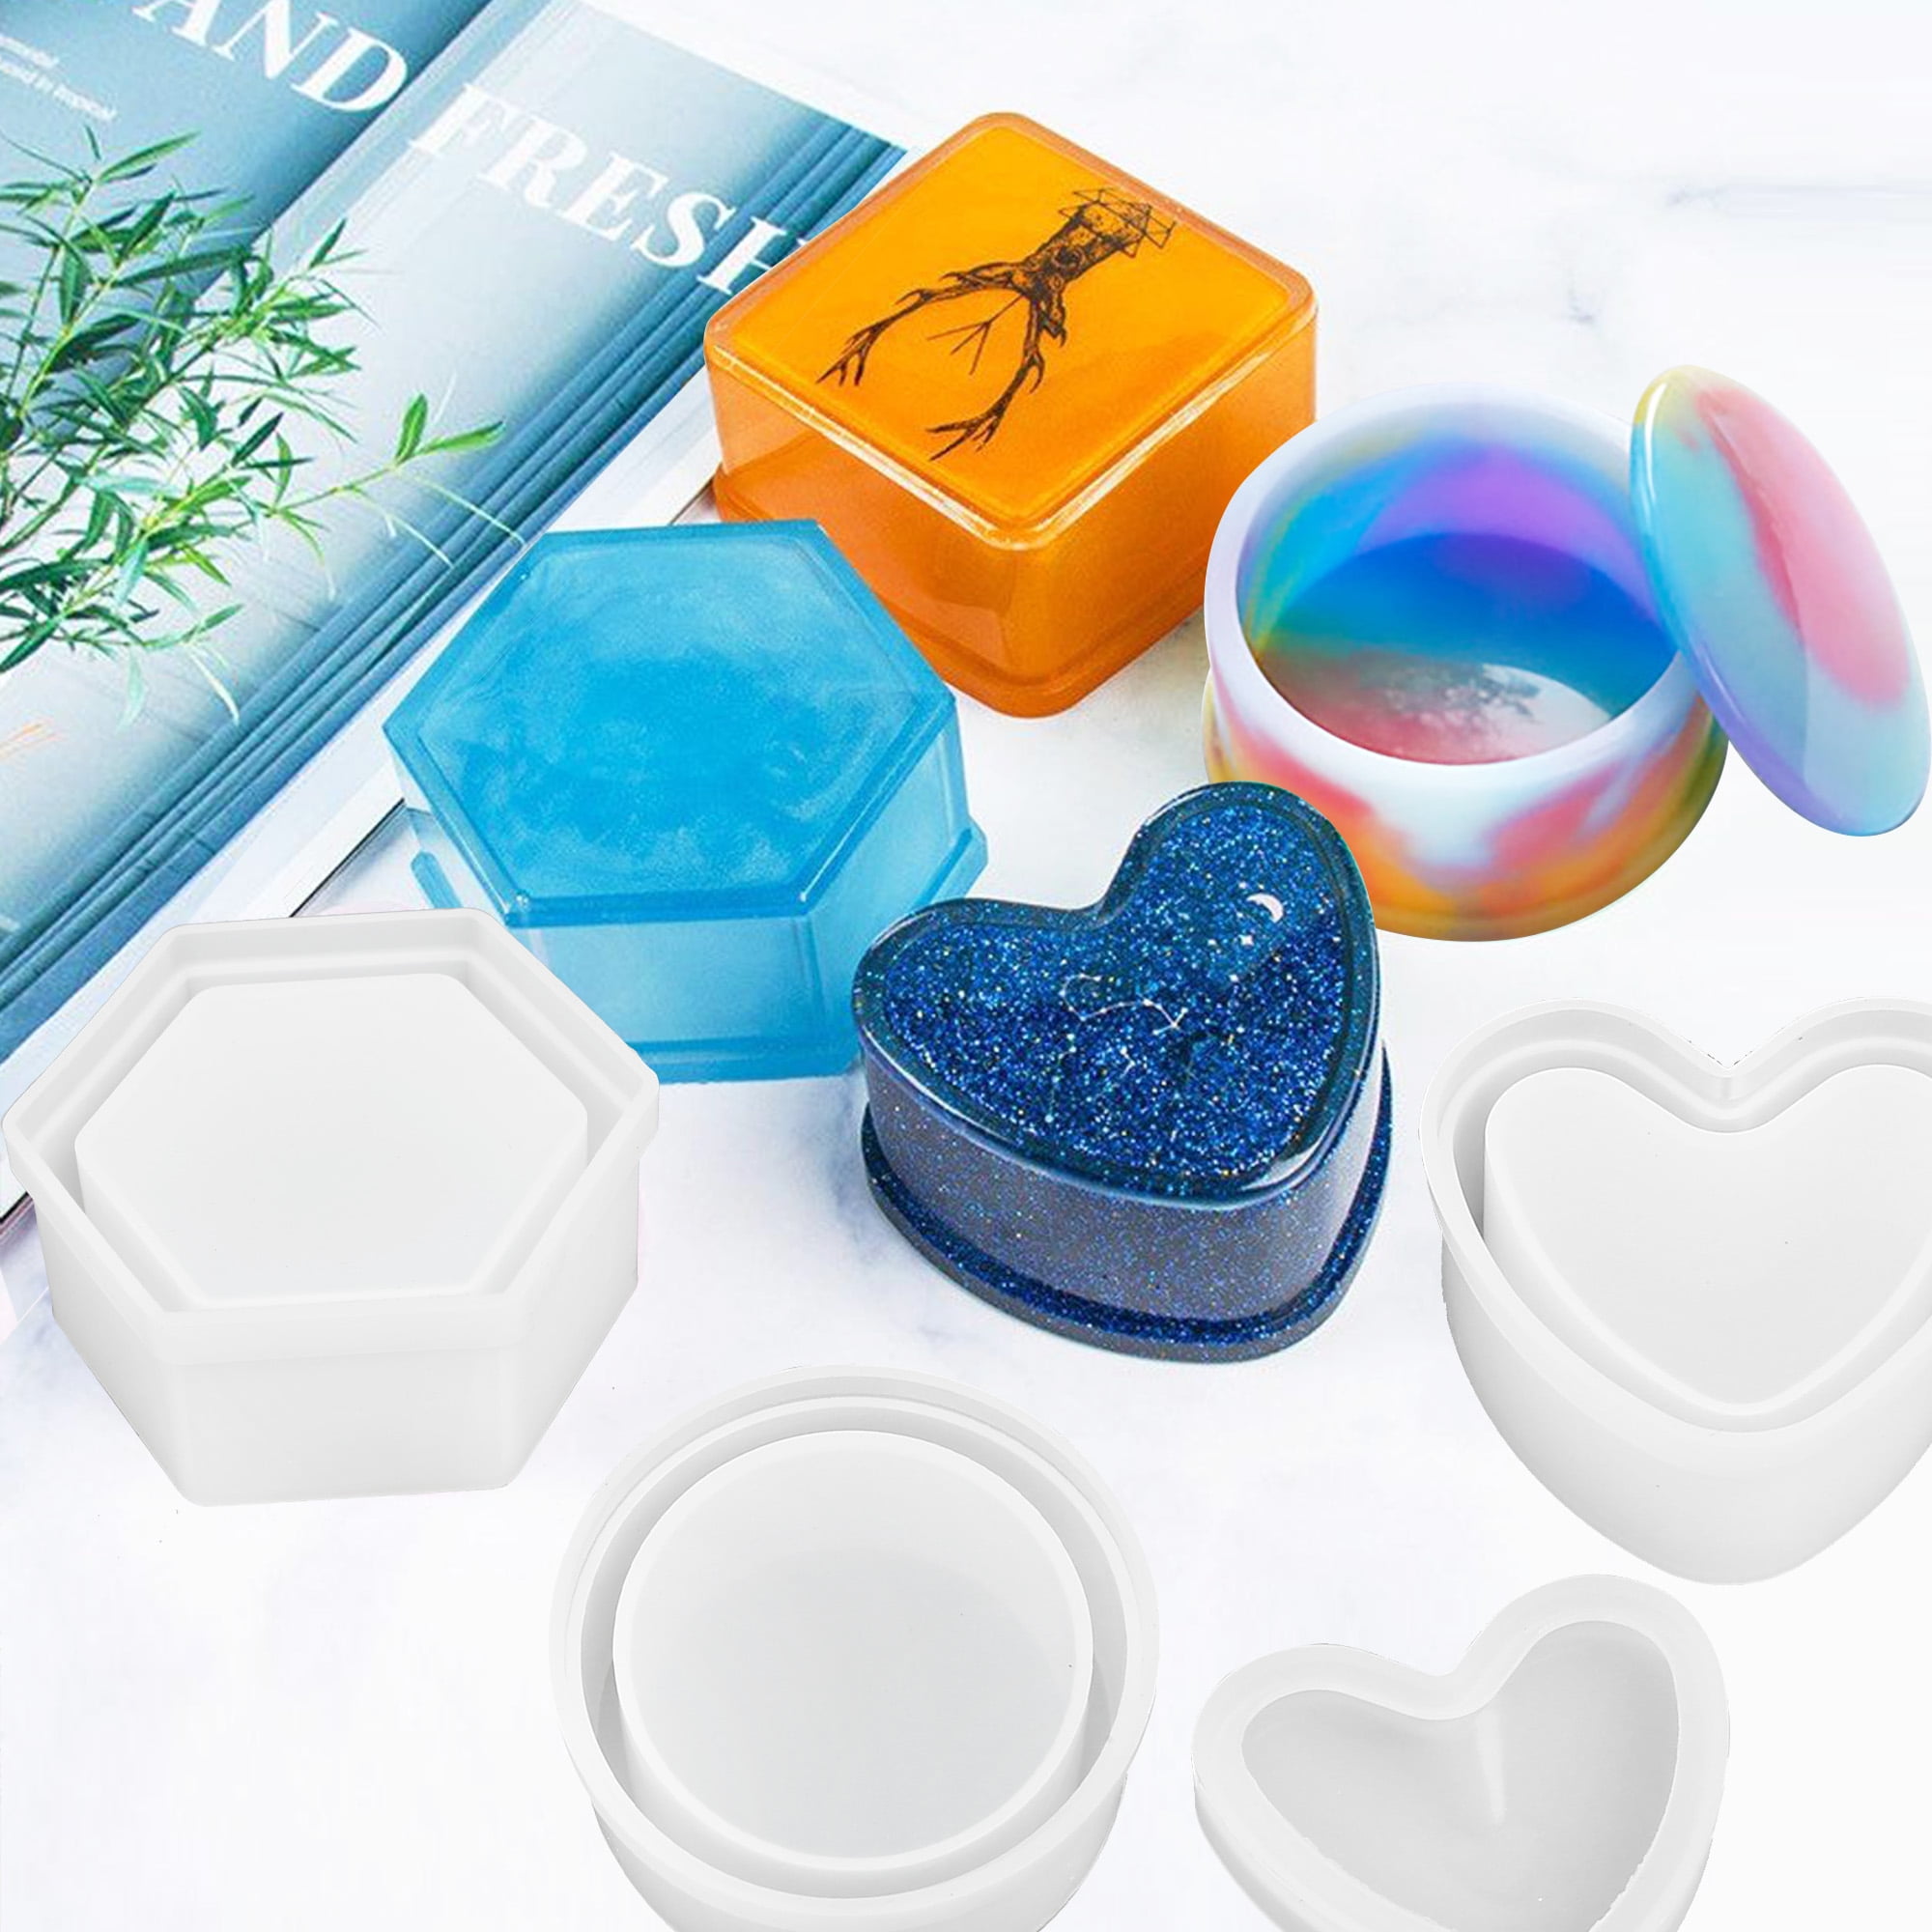 LotFancy 4Pcs Epoxy Resin Molds, Round Clear Hexagon Square Heart Shaped  Storage Box Molds 